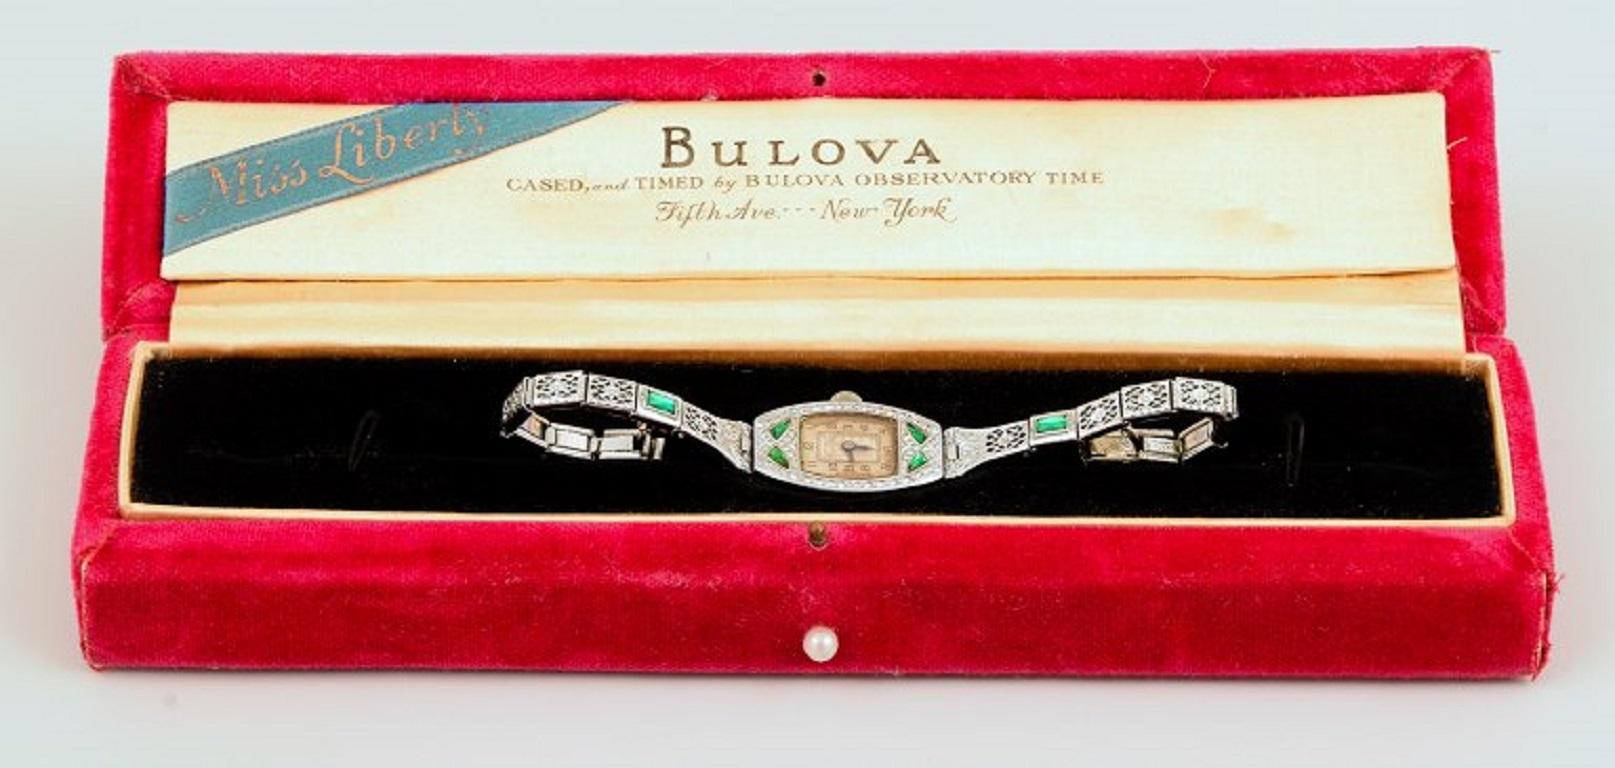 1929 BULOVA 'Miss Liberty' Ladies Art Deco Watch, featuring simulated green gems.
The watch houses an early 6AP manual wind caliber, running on 15 jewels. This movement is cased in a gorgeous hinged BULOVA signed 14K gold filled case in white tone